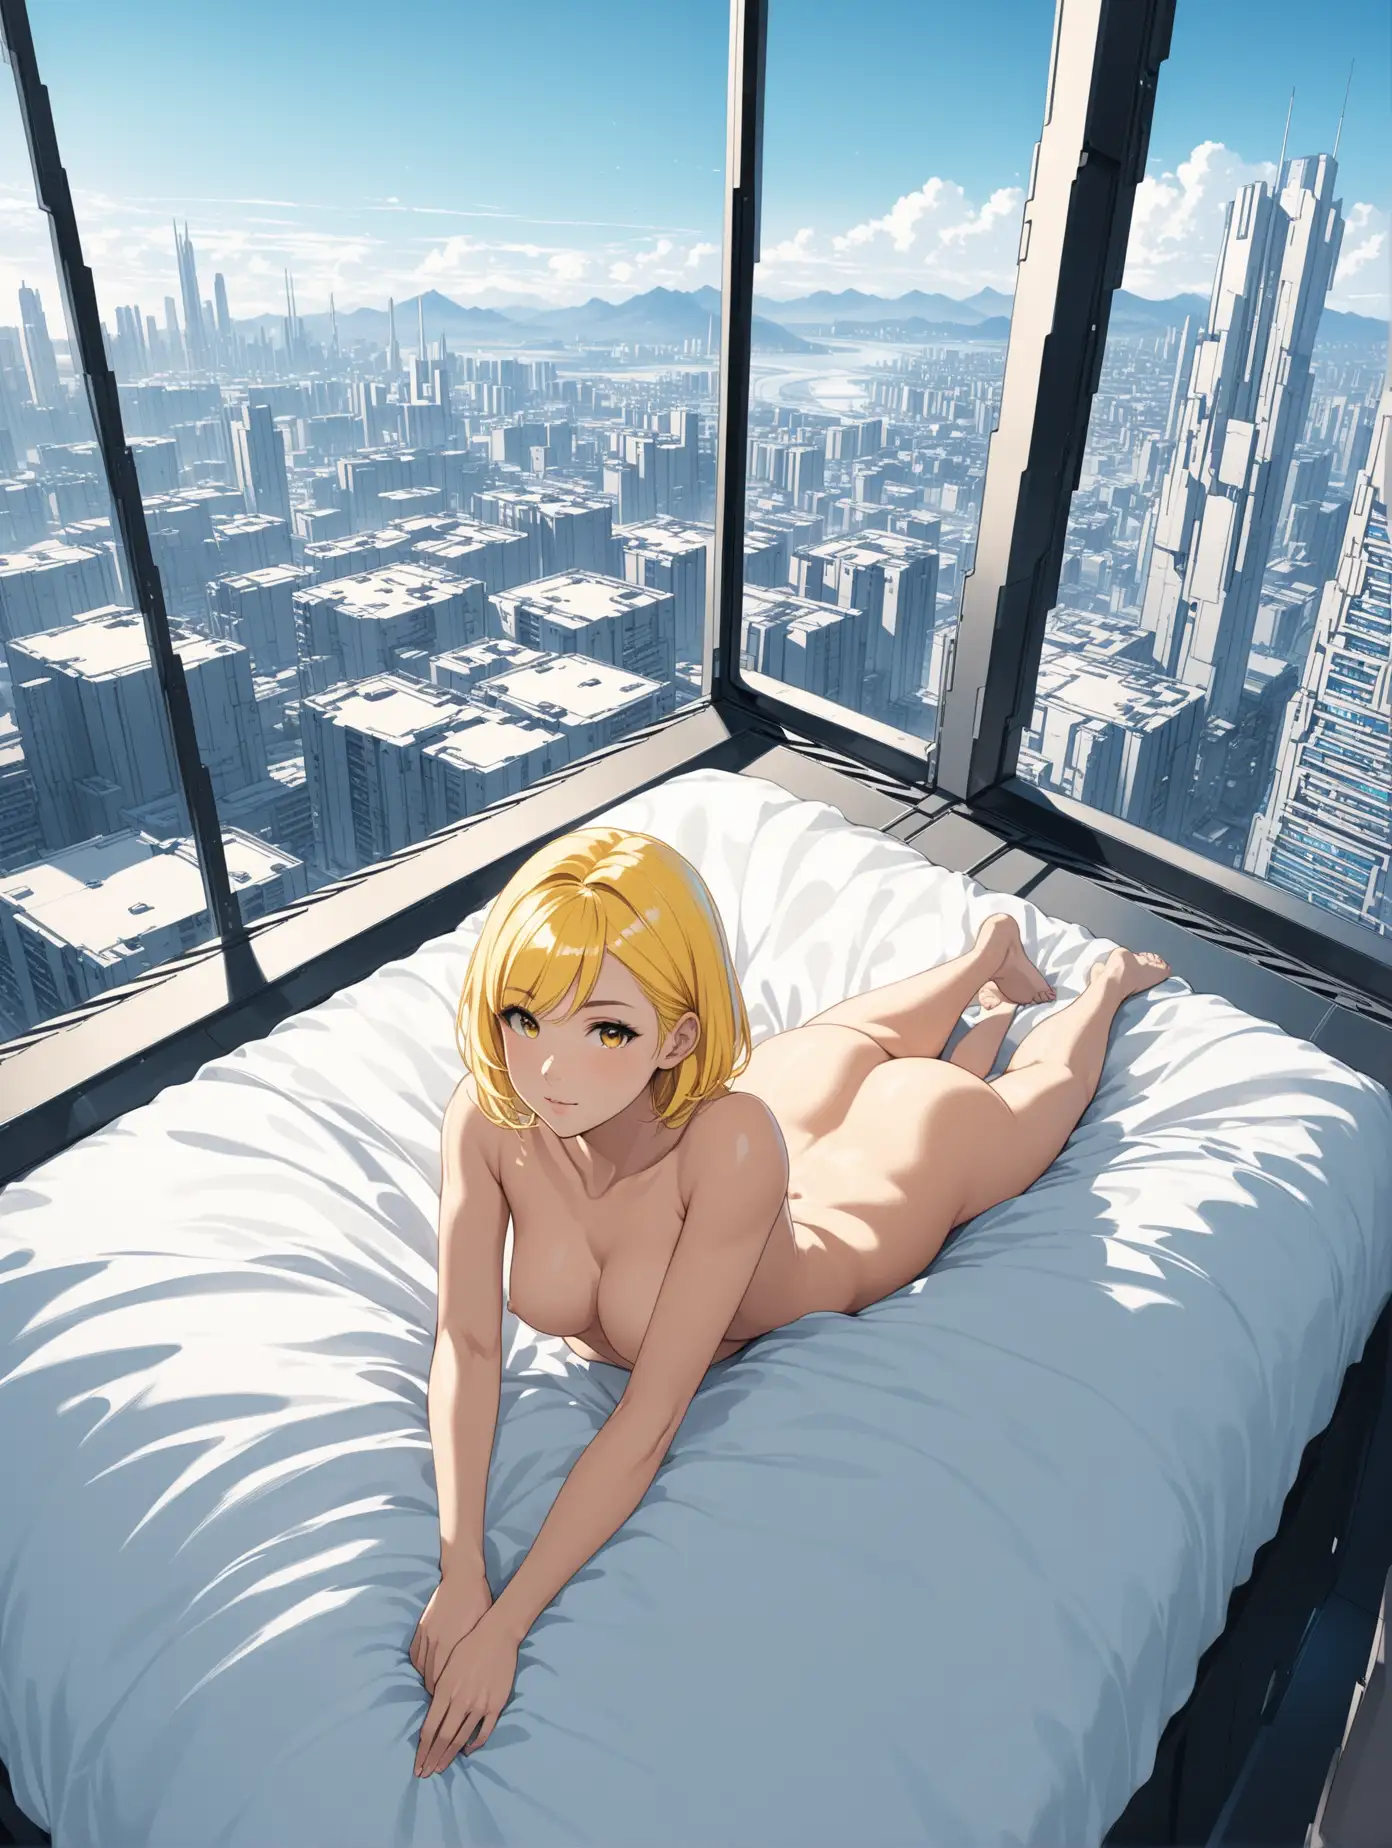 Futuristic Apartment Relaxation YellowHaired Heroine in Nude Pose